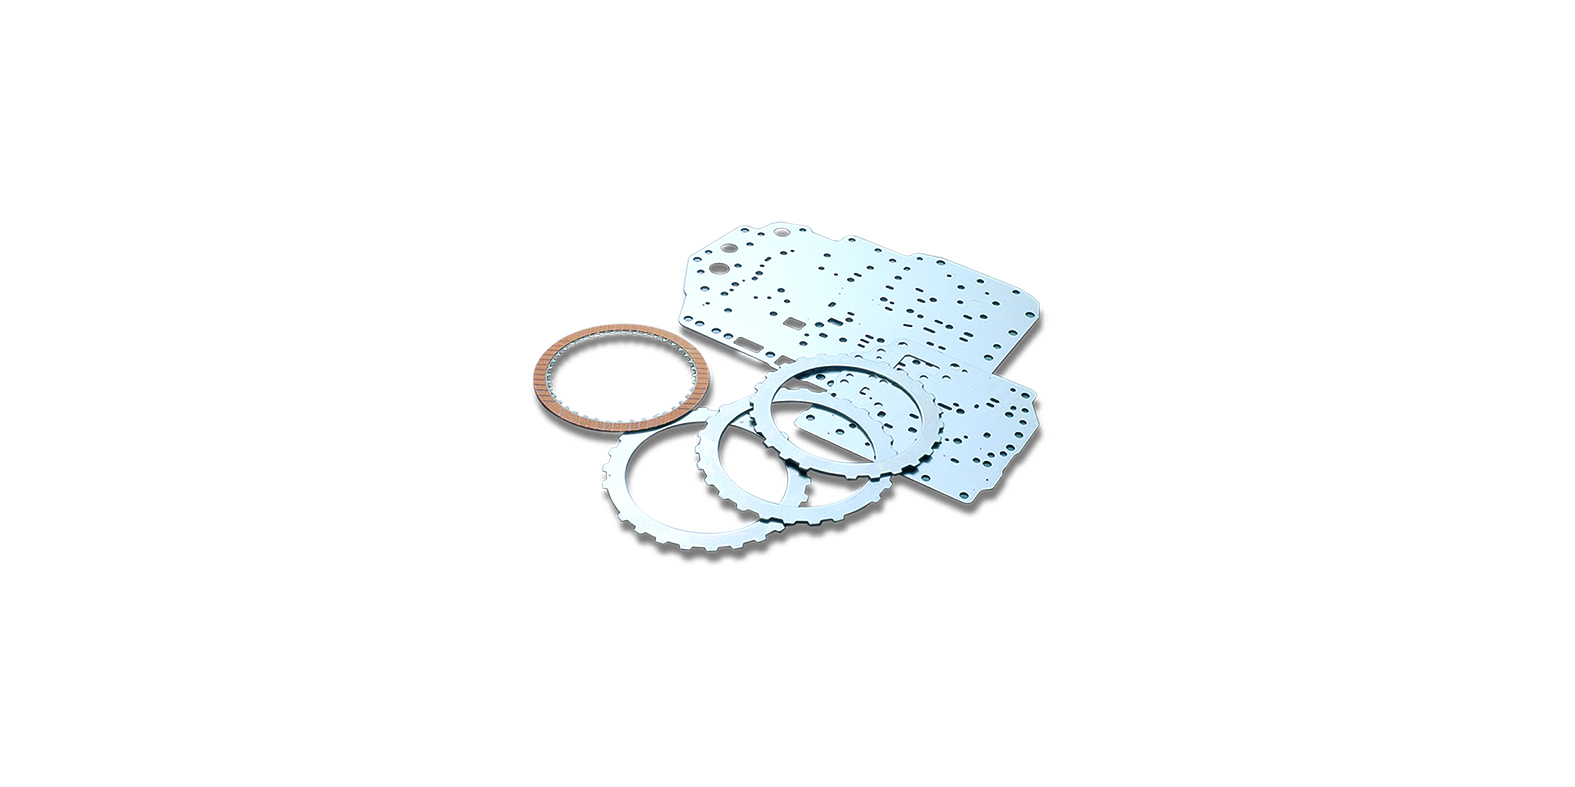 Clutch plate & separation plate